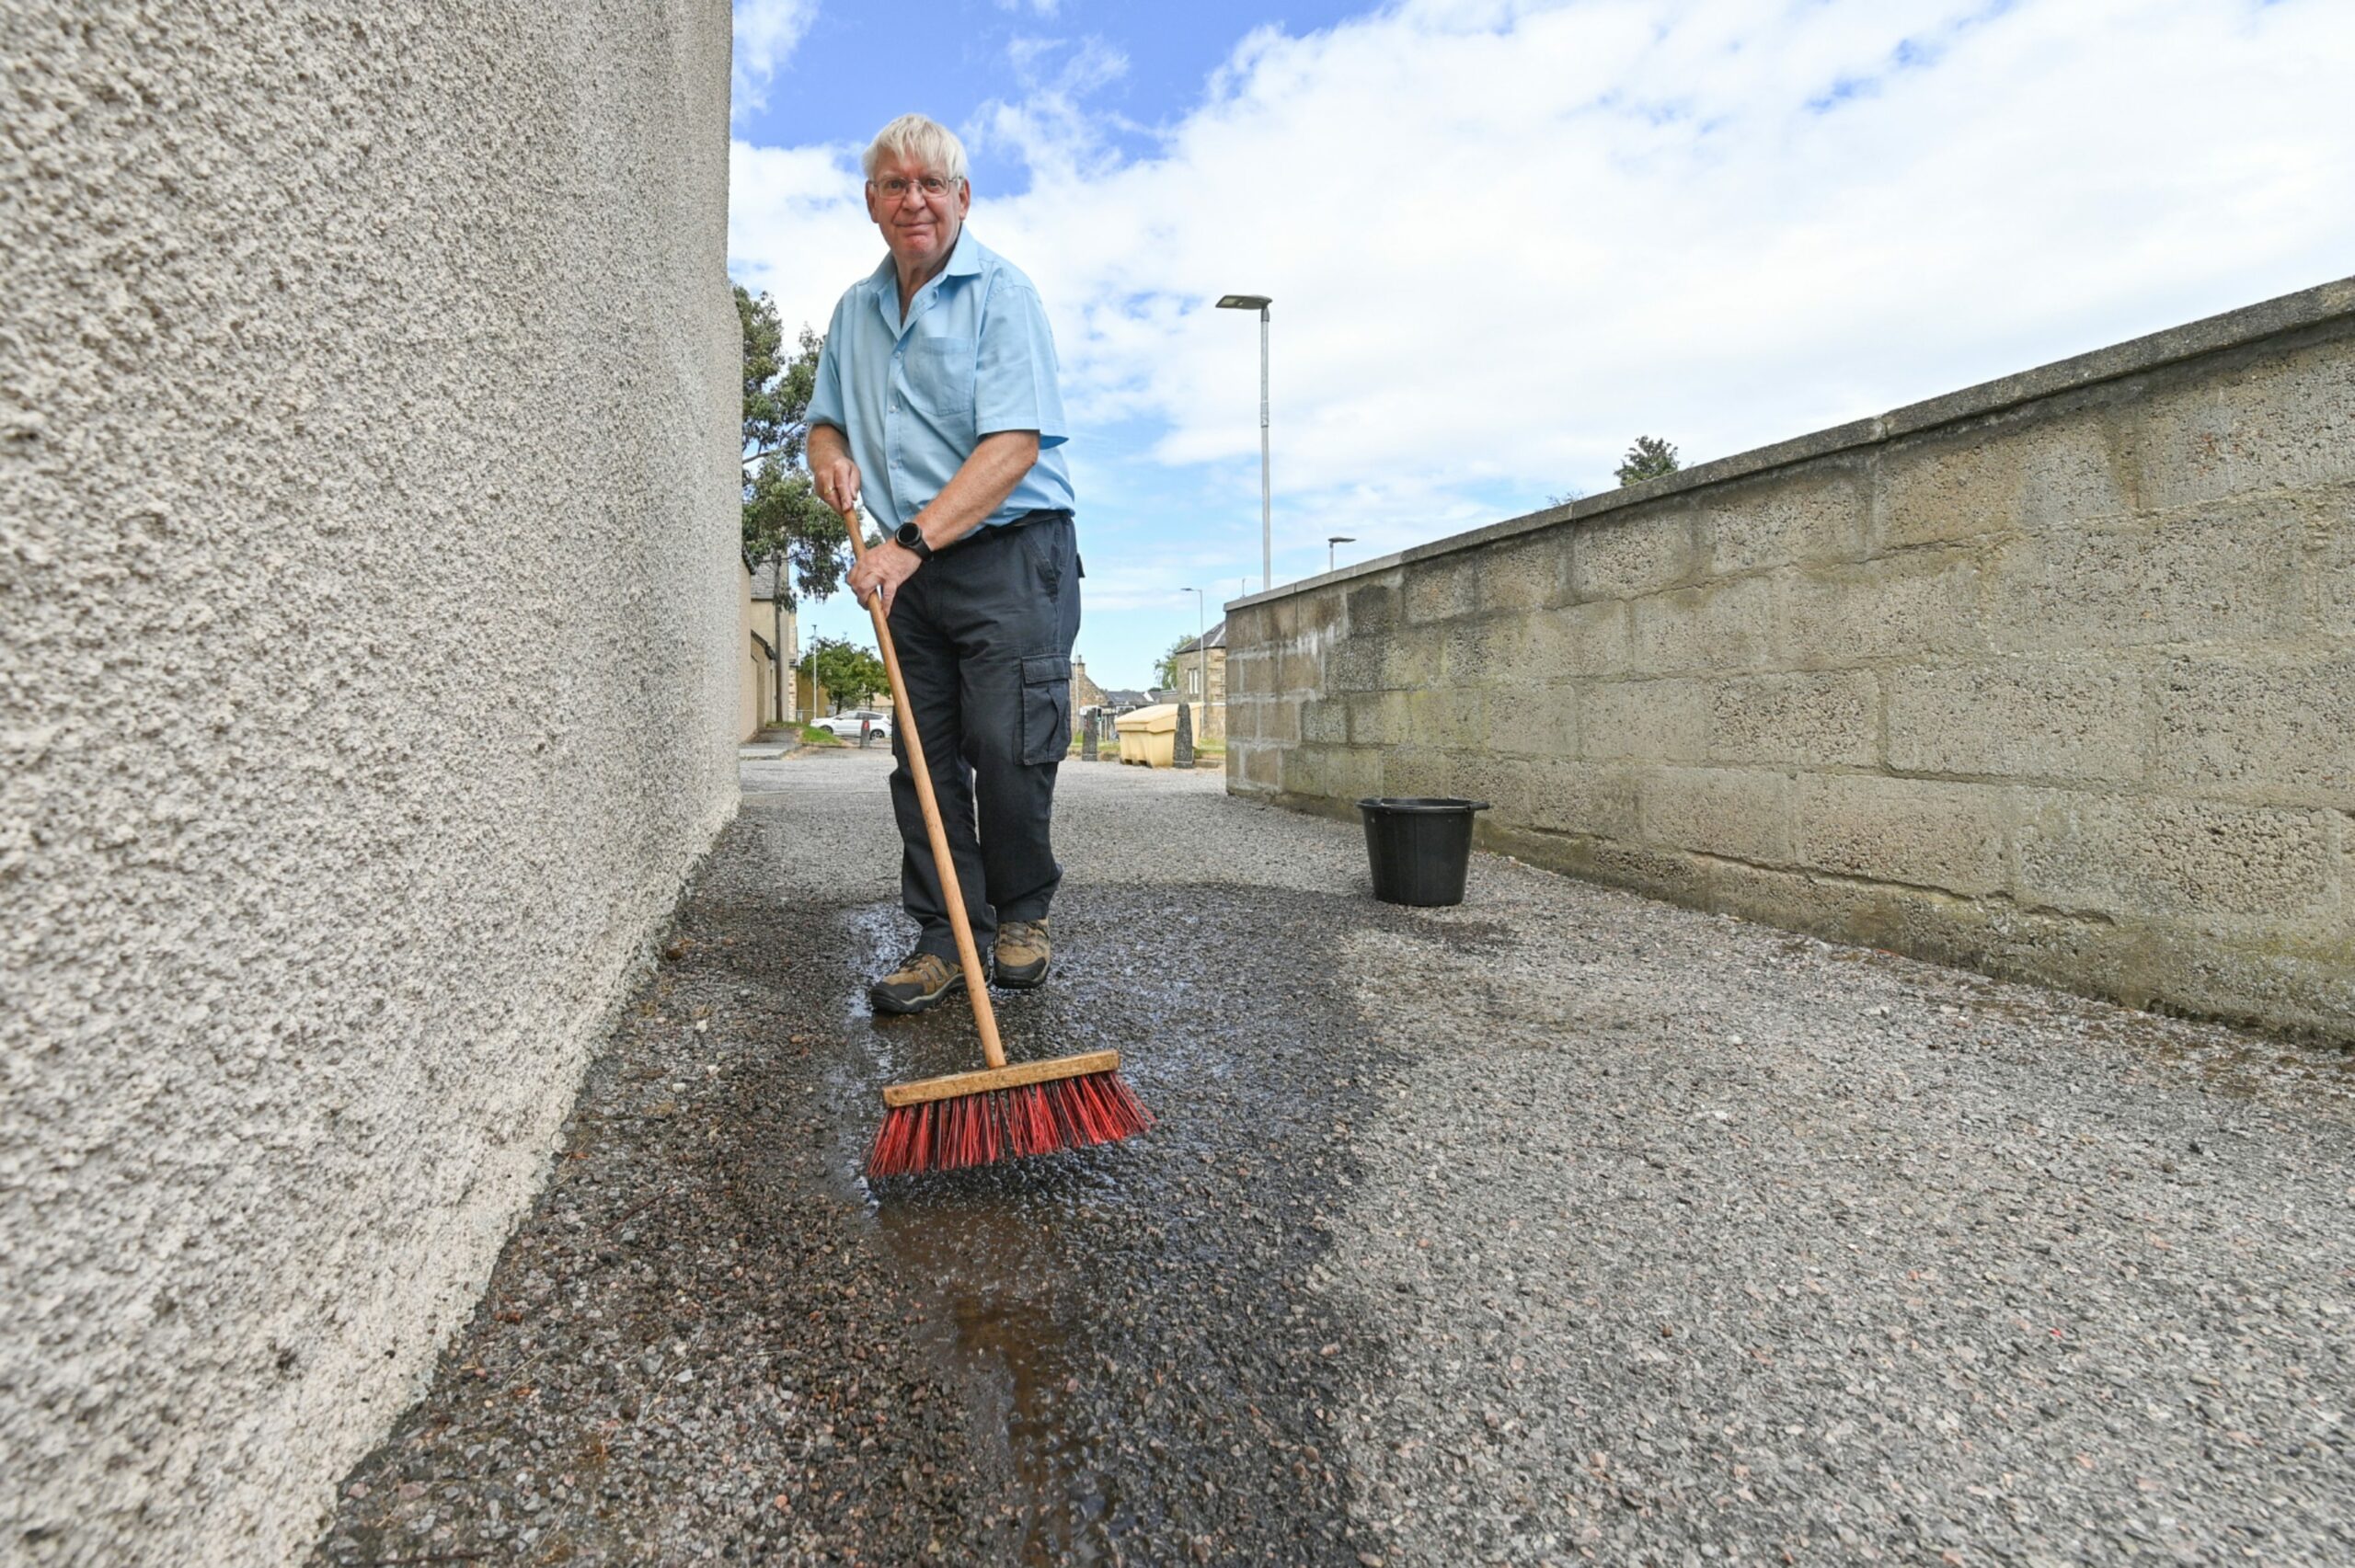 Elgin resident David Keeler sweeping outside his Elgin home after seagulls caused mess